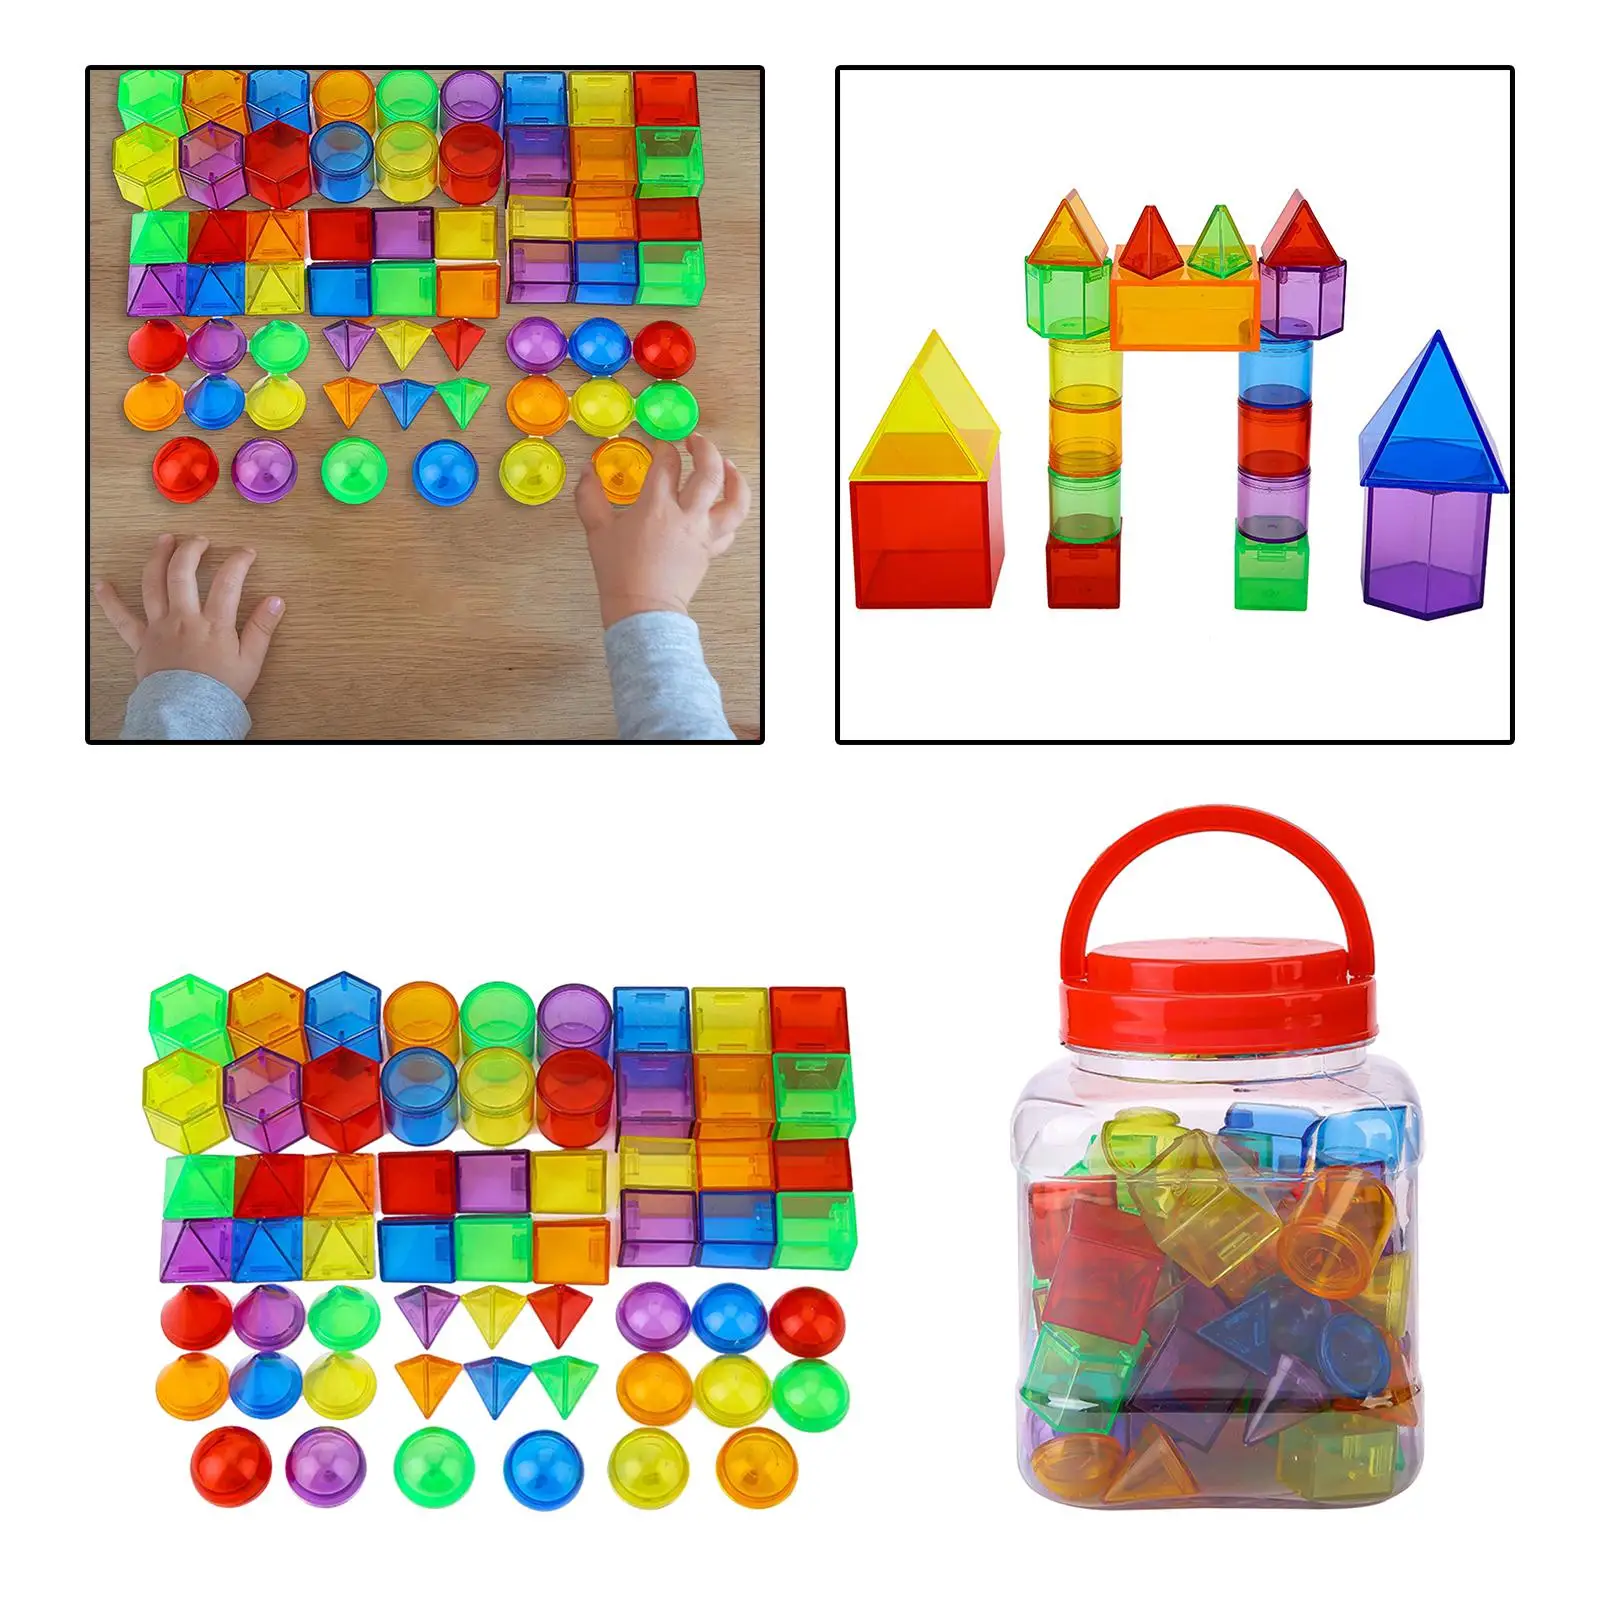 Small Geometric Solids Educational Toys Sensory Parent Child Interaction Montessori Toys Puzzled For Gifts Living Room Children